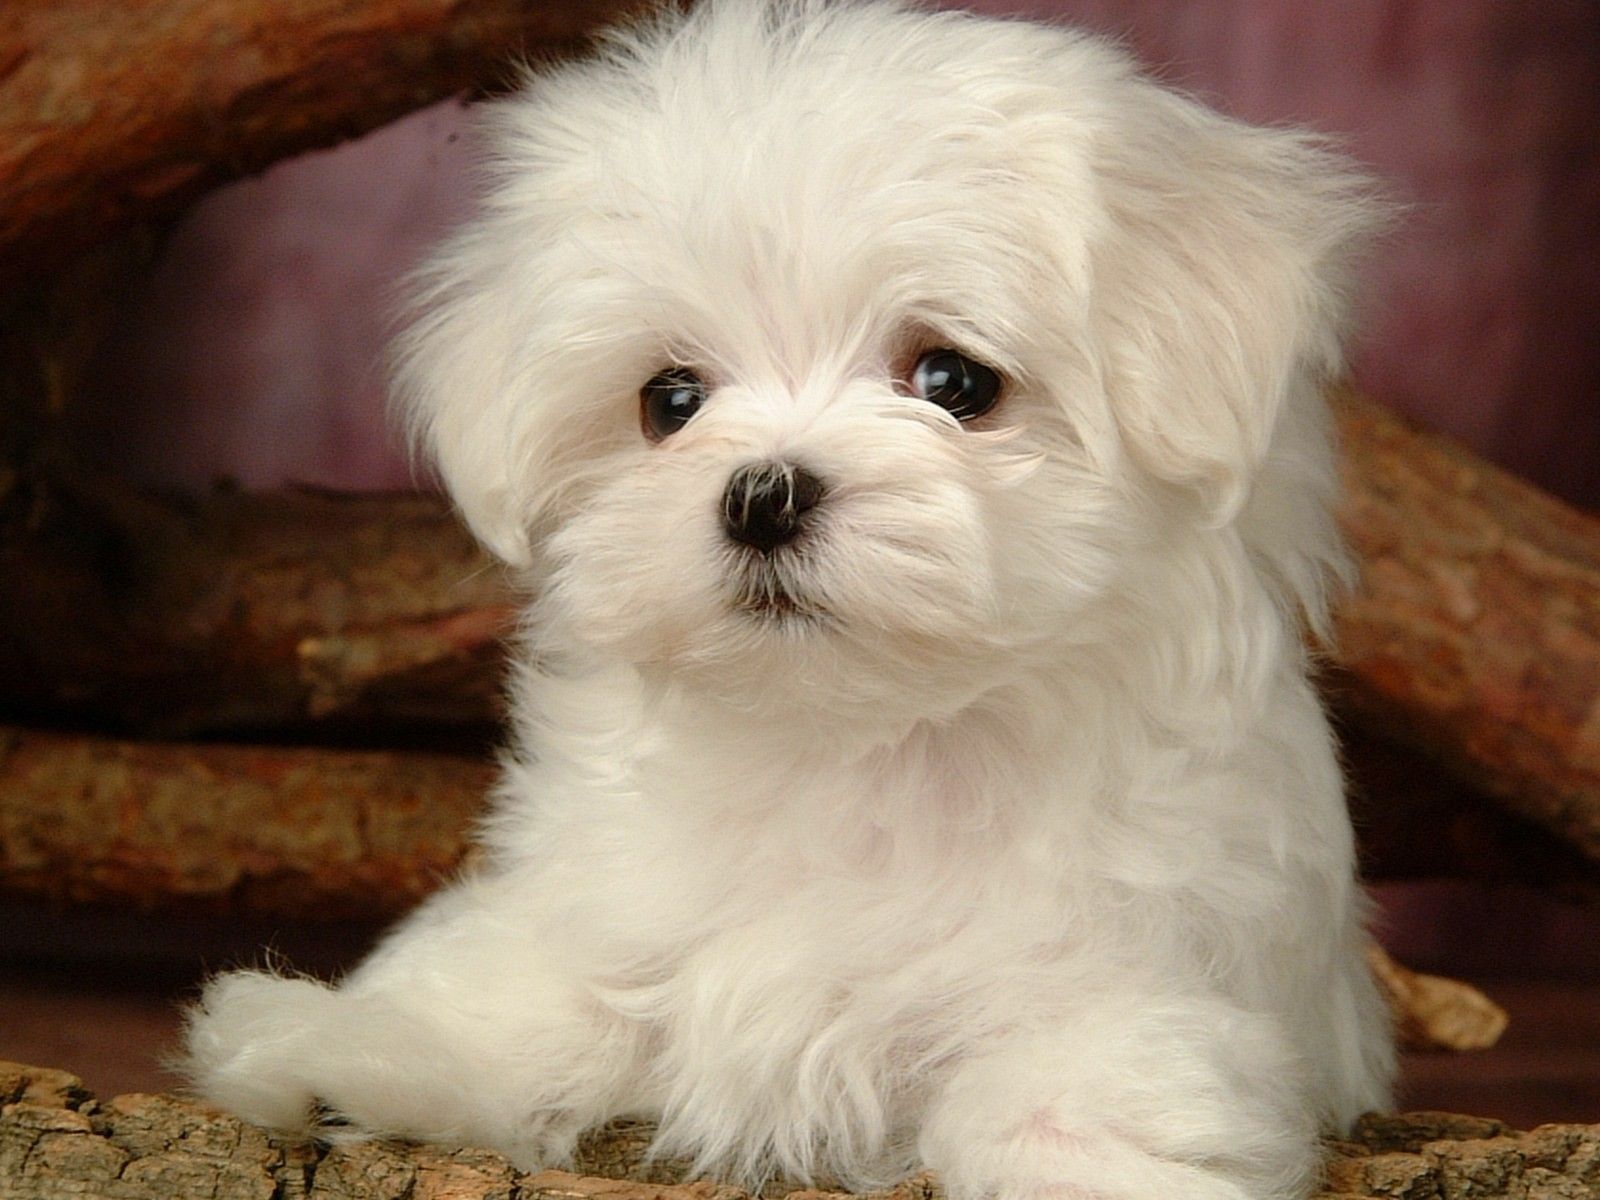 Fluffy Dog Wallpapers - Wallpaper Cave